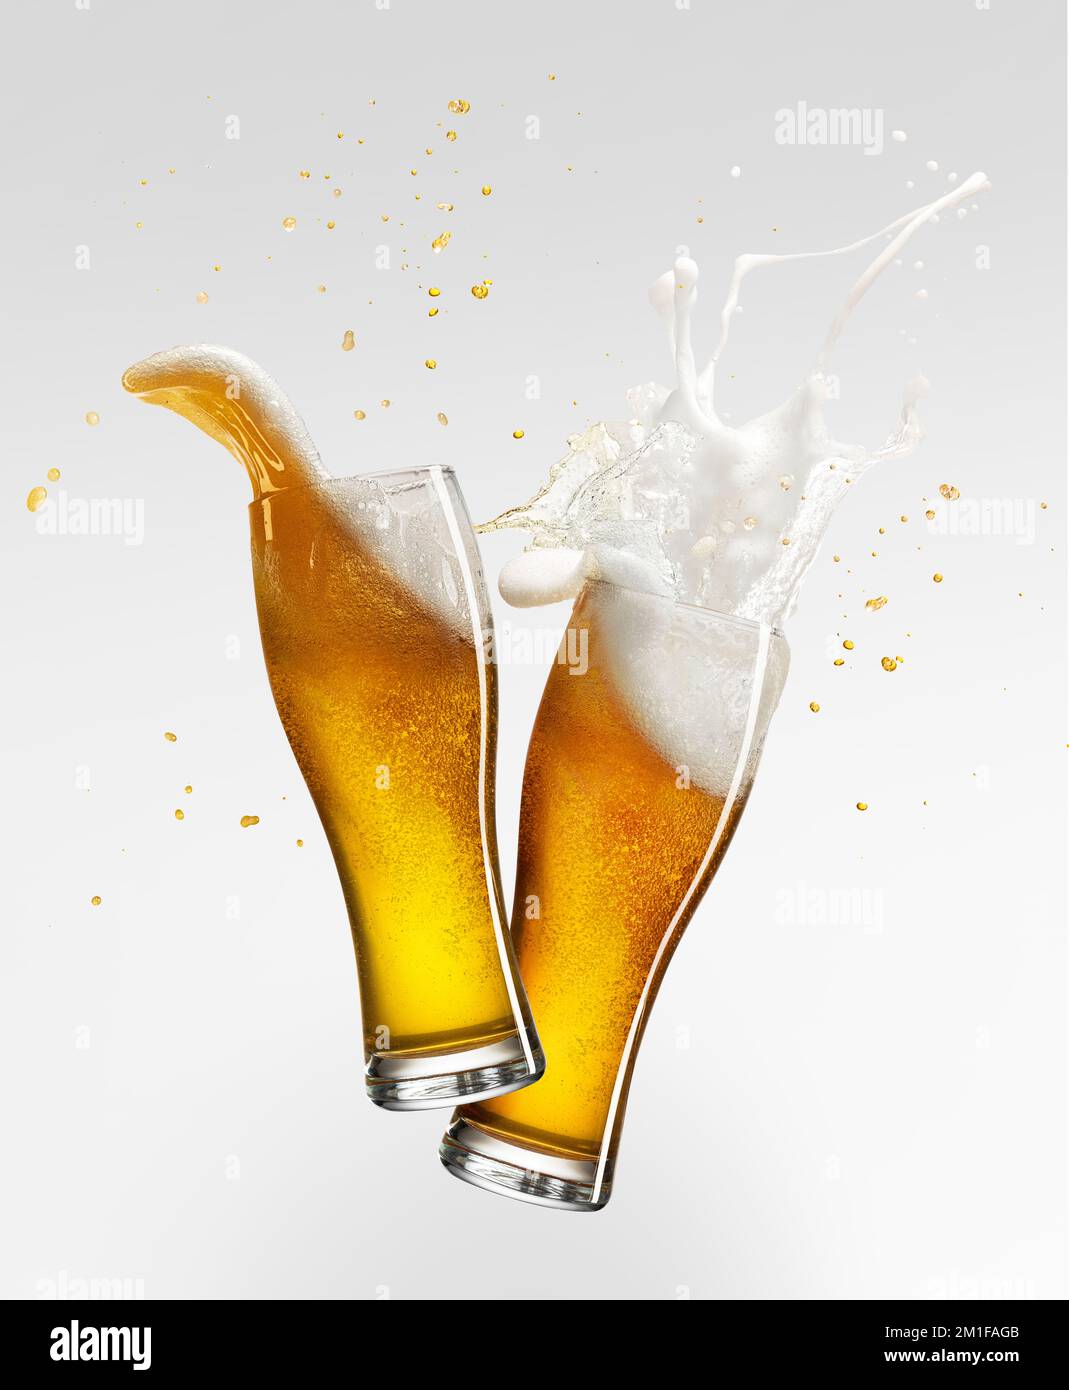 Foam splashes. Two glasses with lager foamy beer isolated over grey background. Concept of alcohol, oktoberfest, drinks Stock Photo